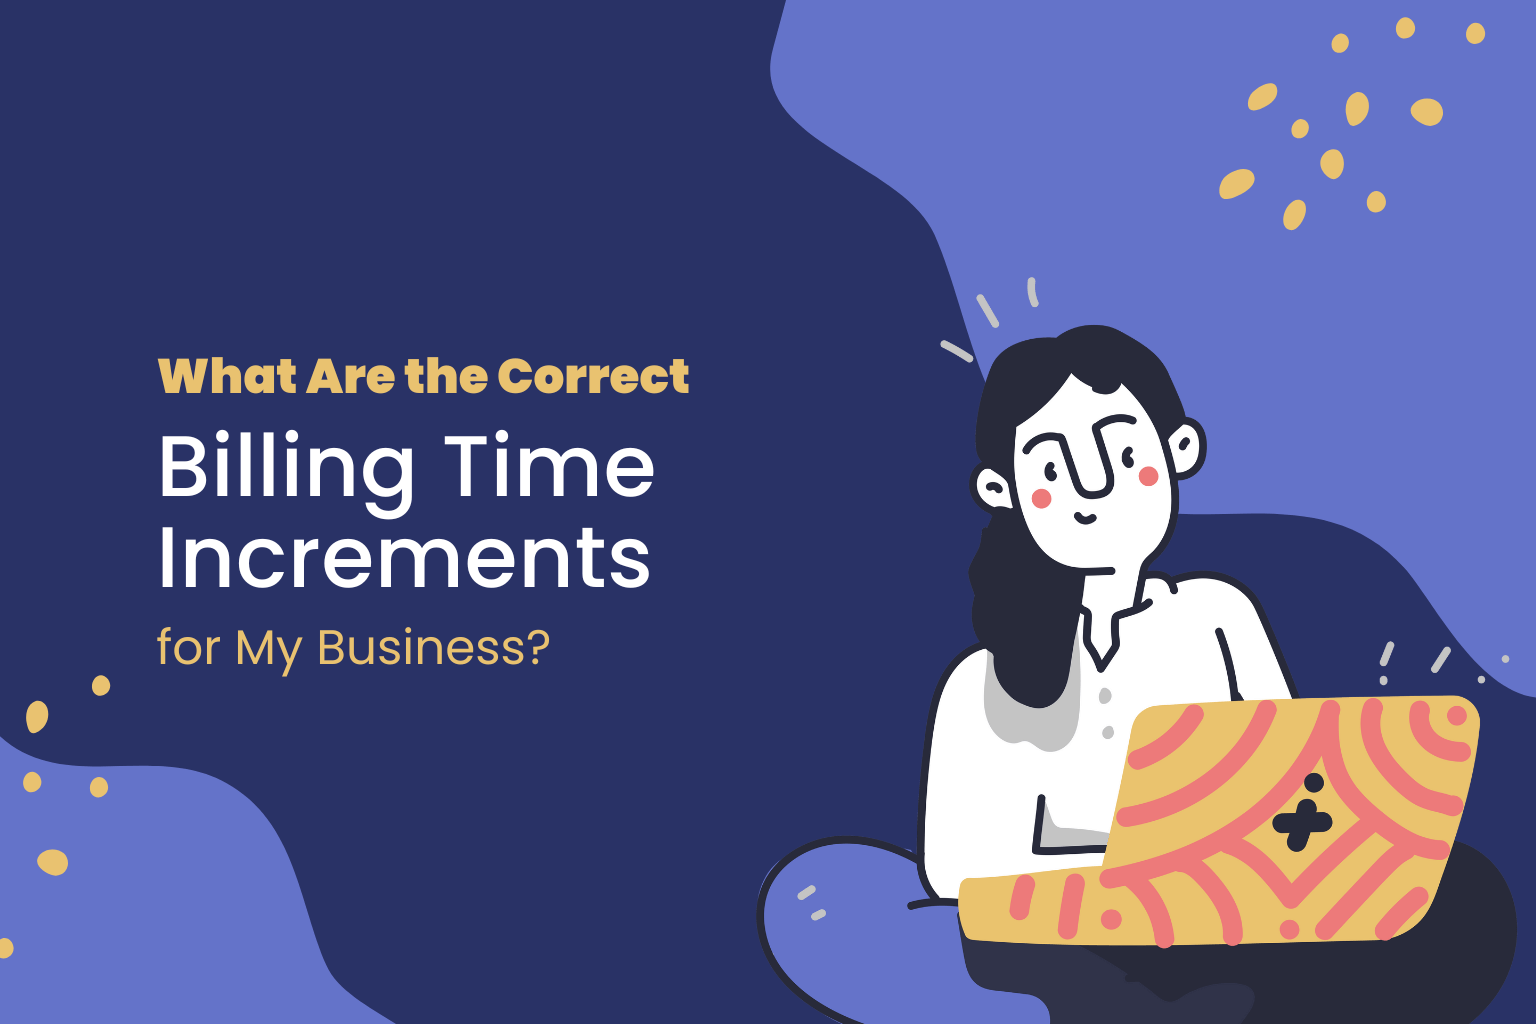 What Are the Correct Billing Time Increments for My Business?